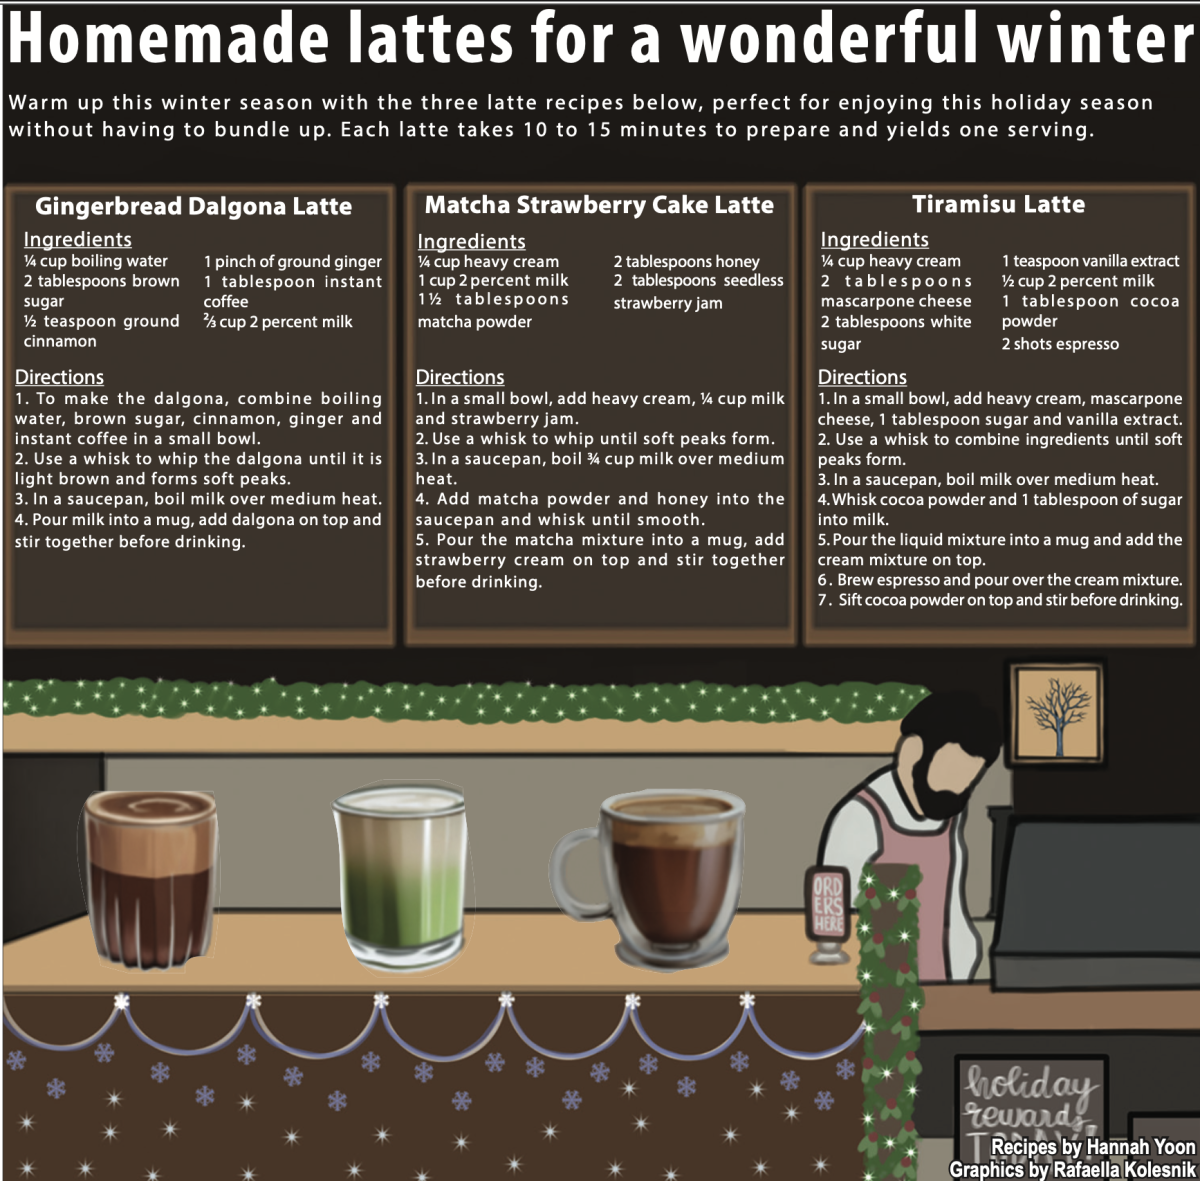 Homemade lattes for a wonderful winter